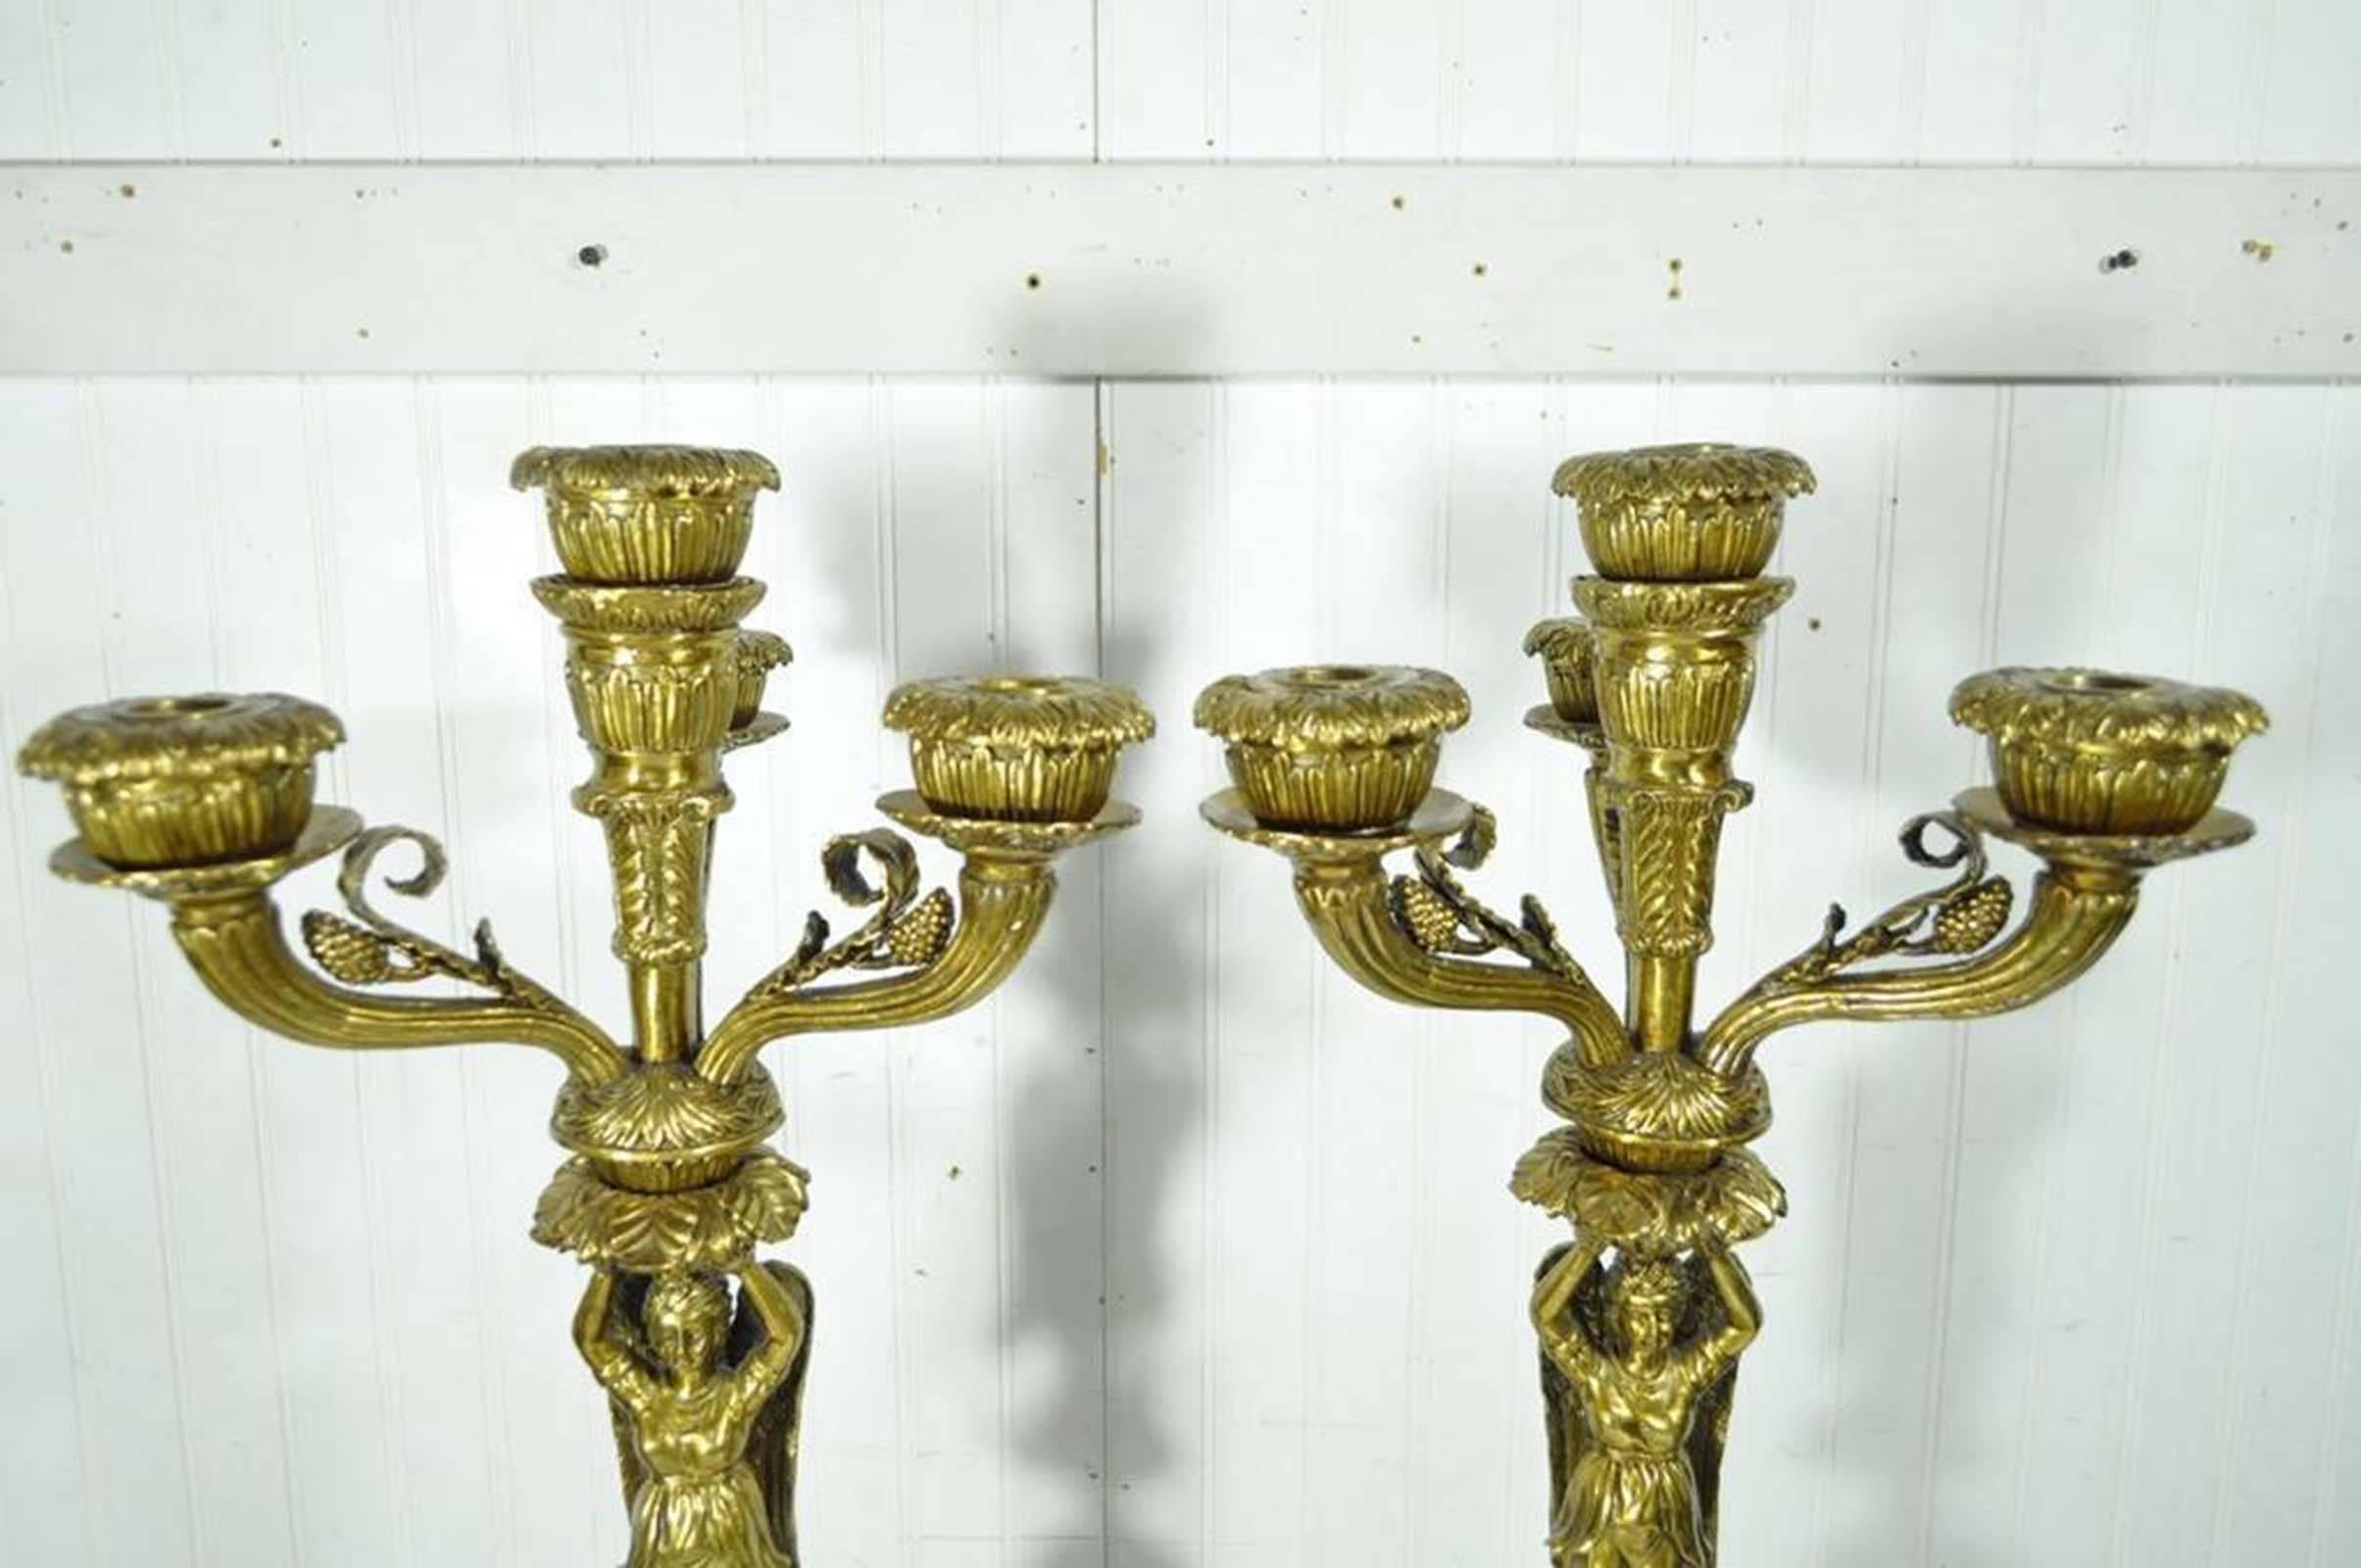 Fantastic pair of heavy, 20th century, reproduction bronze and porcelain figural candelabras in the French neoclassical taste. Each candelabra features four candleholder arms, full winged maiden shafts that stand on neoclassical style spheres which